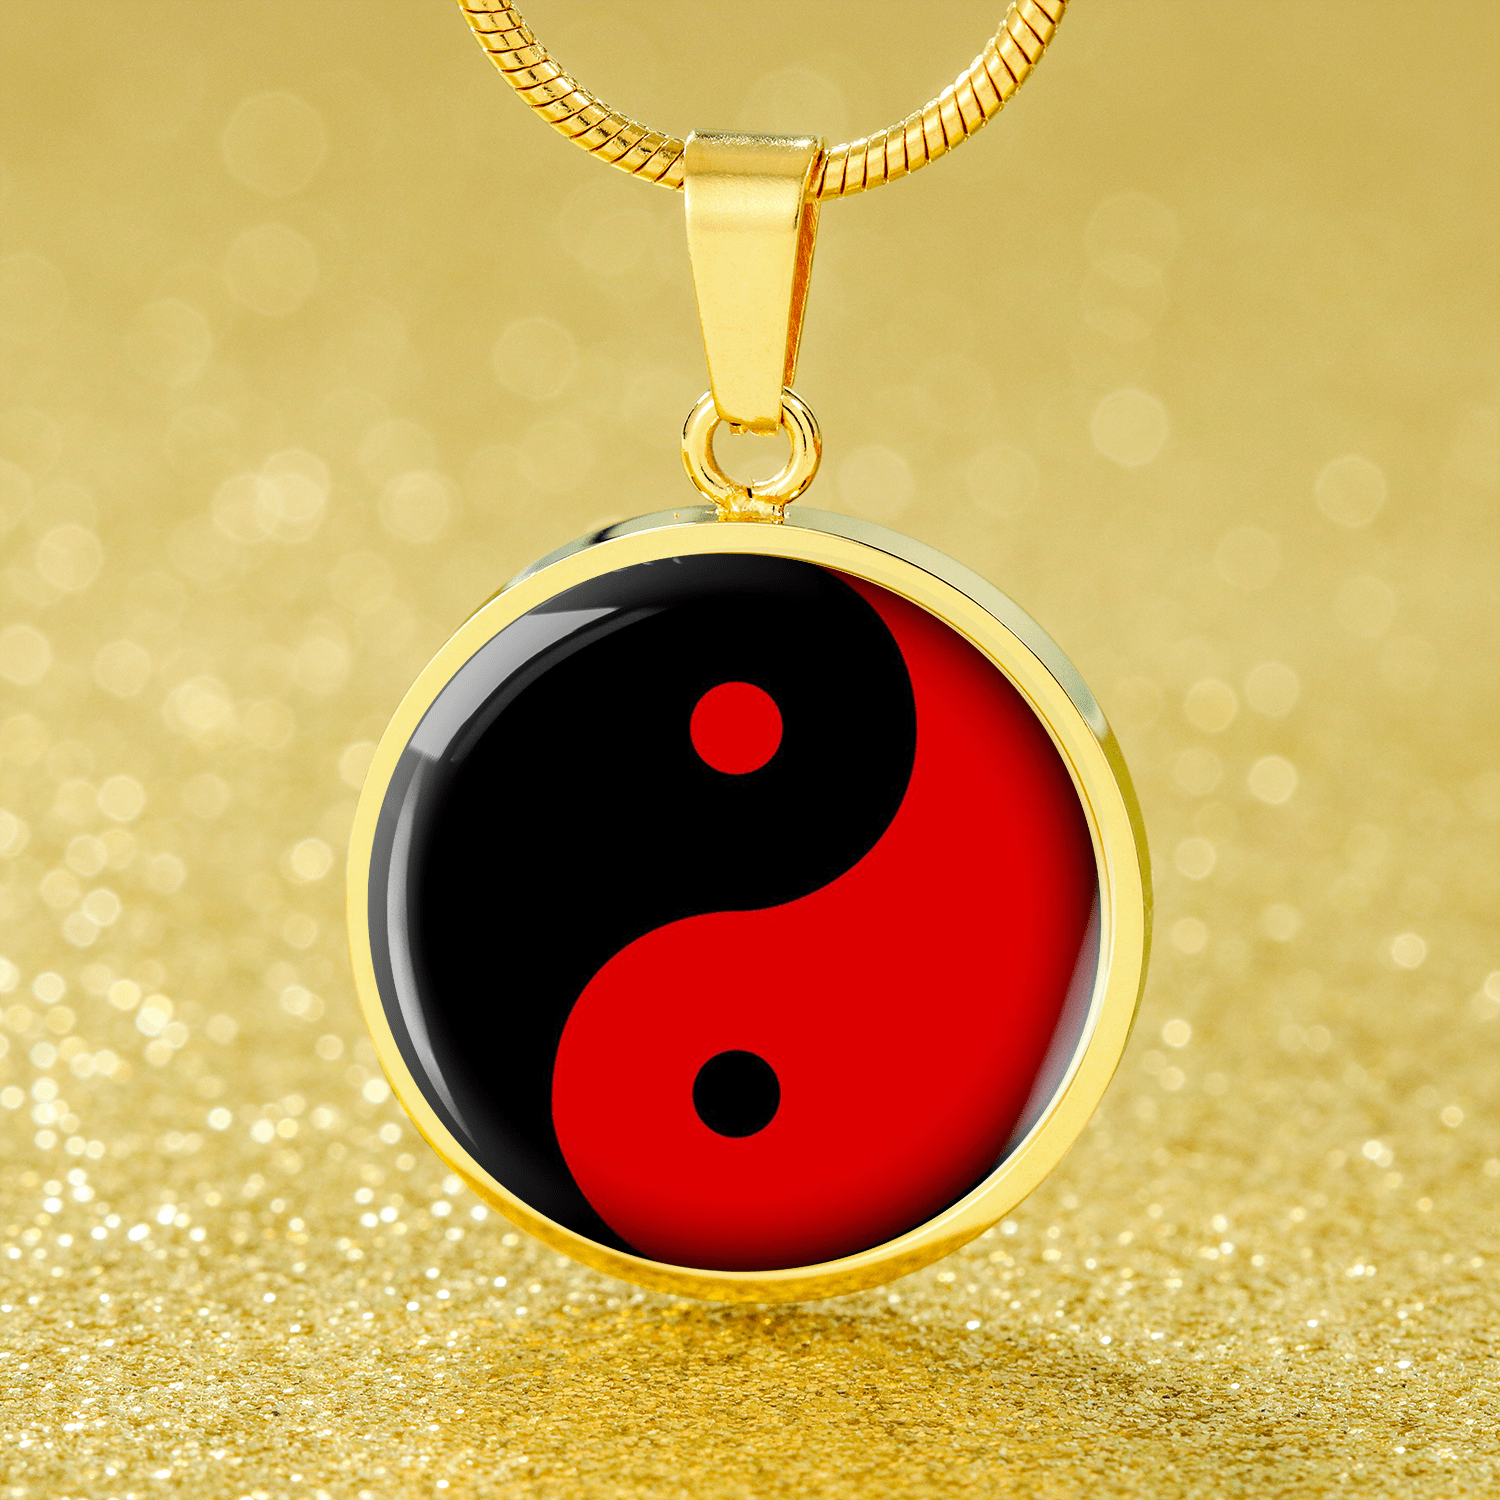 Yin Yang Necklace Black And Red Circle Pendant Stainless Steel or 18k Gold 18-22" - Express Your Love Gifts